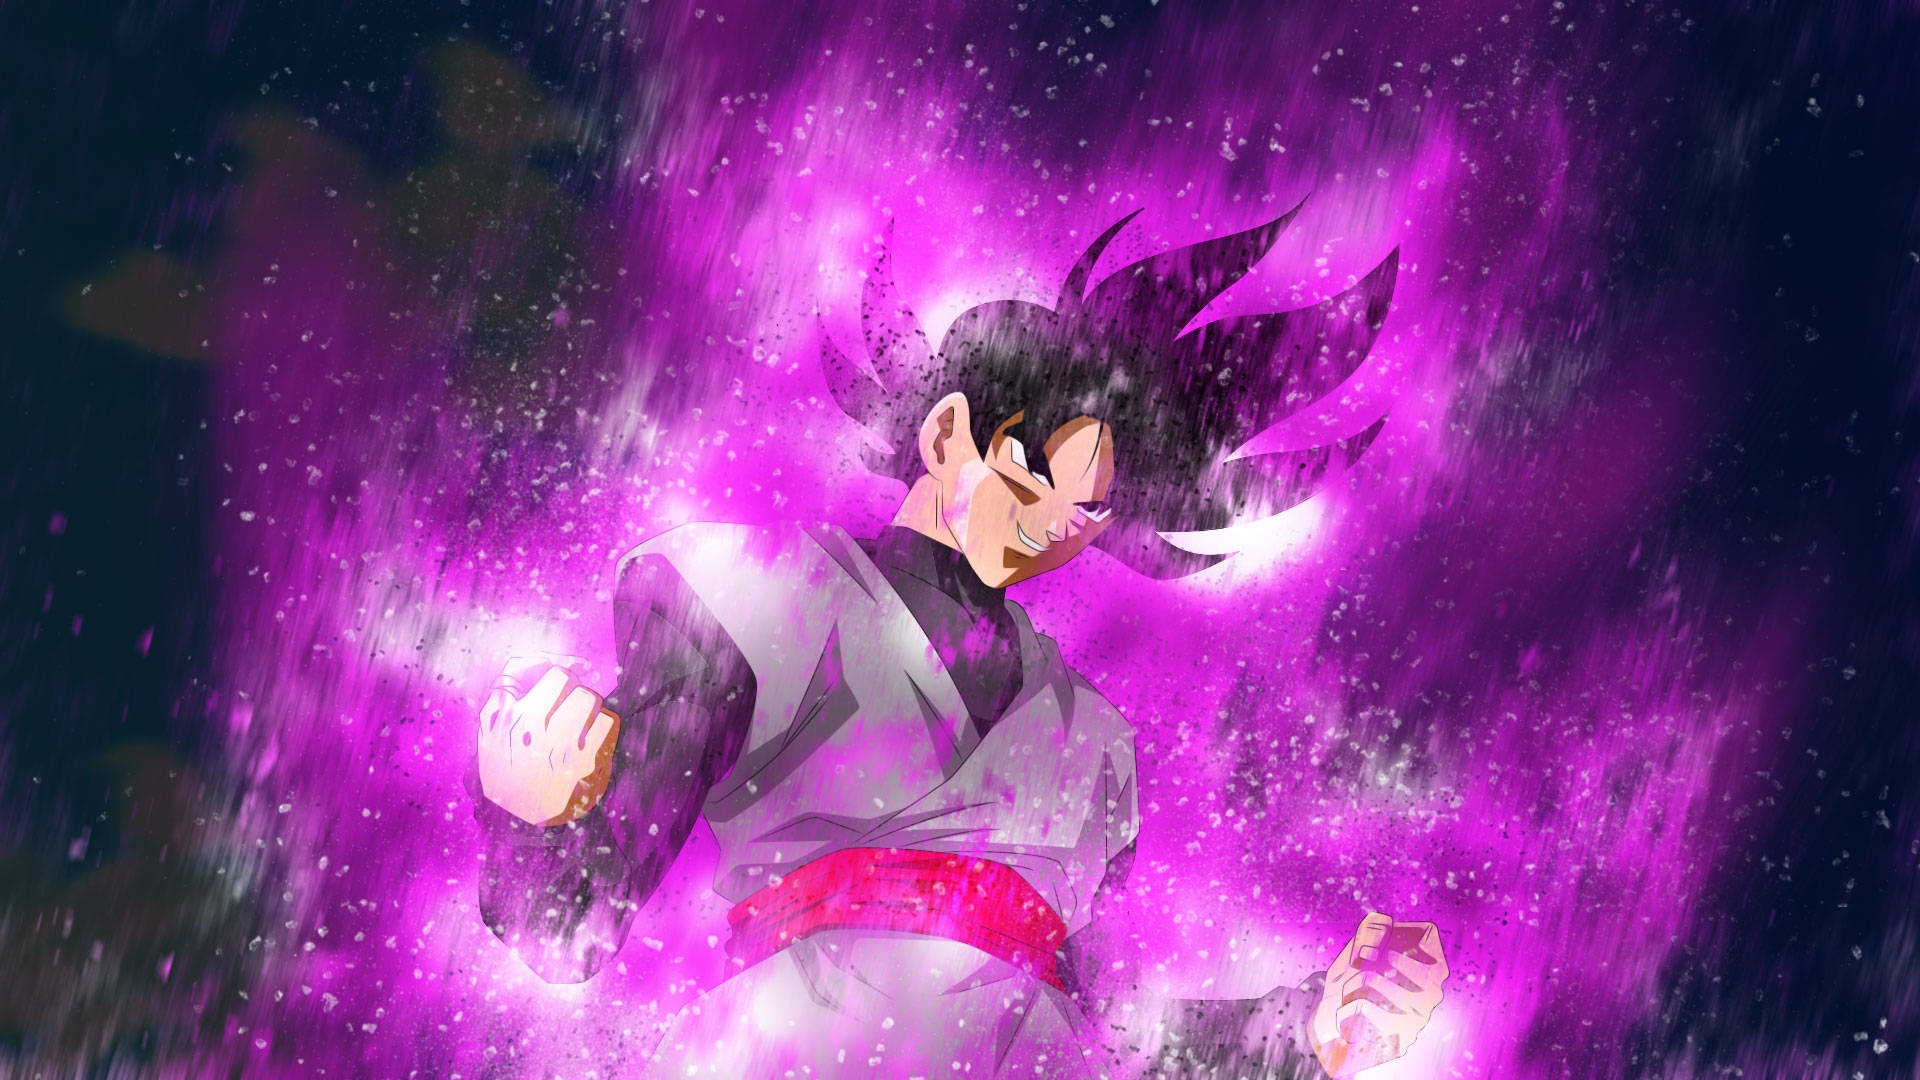 Goku Black Surrounded by a Powerful Purple Aura Wallpaper